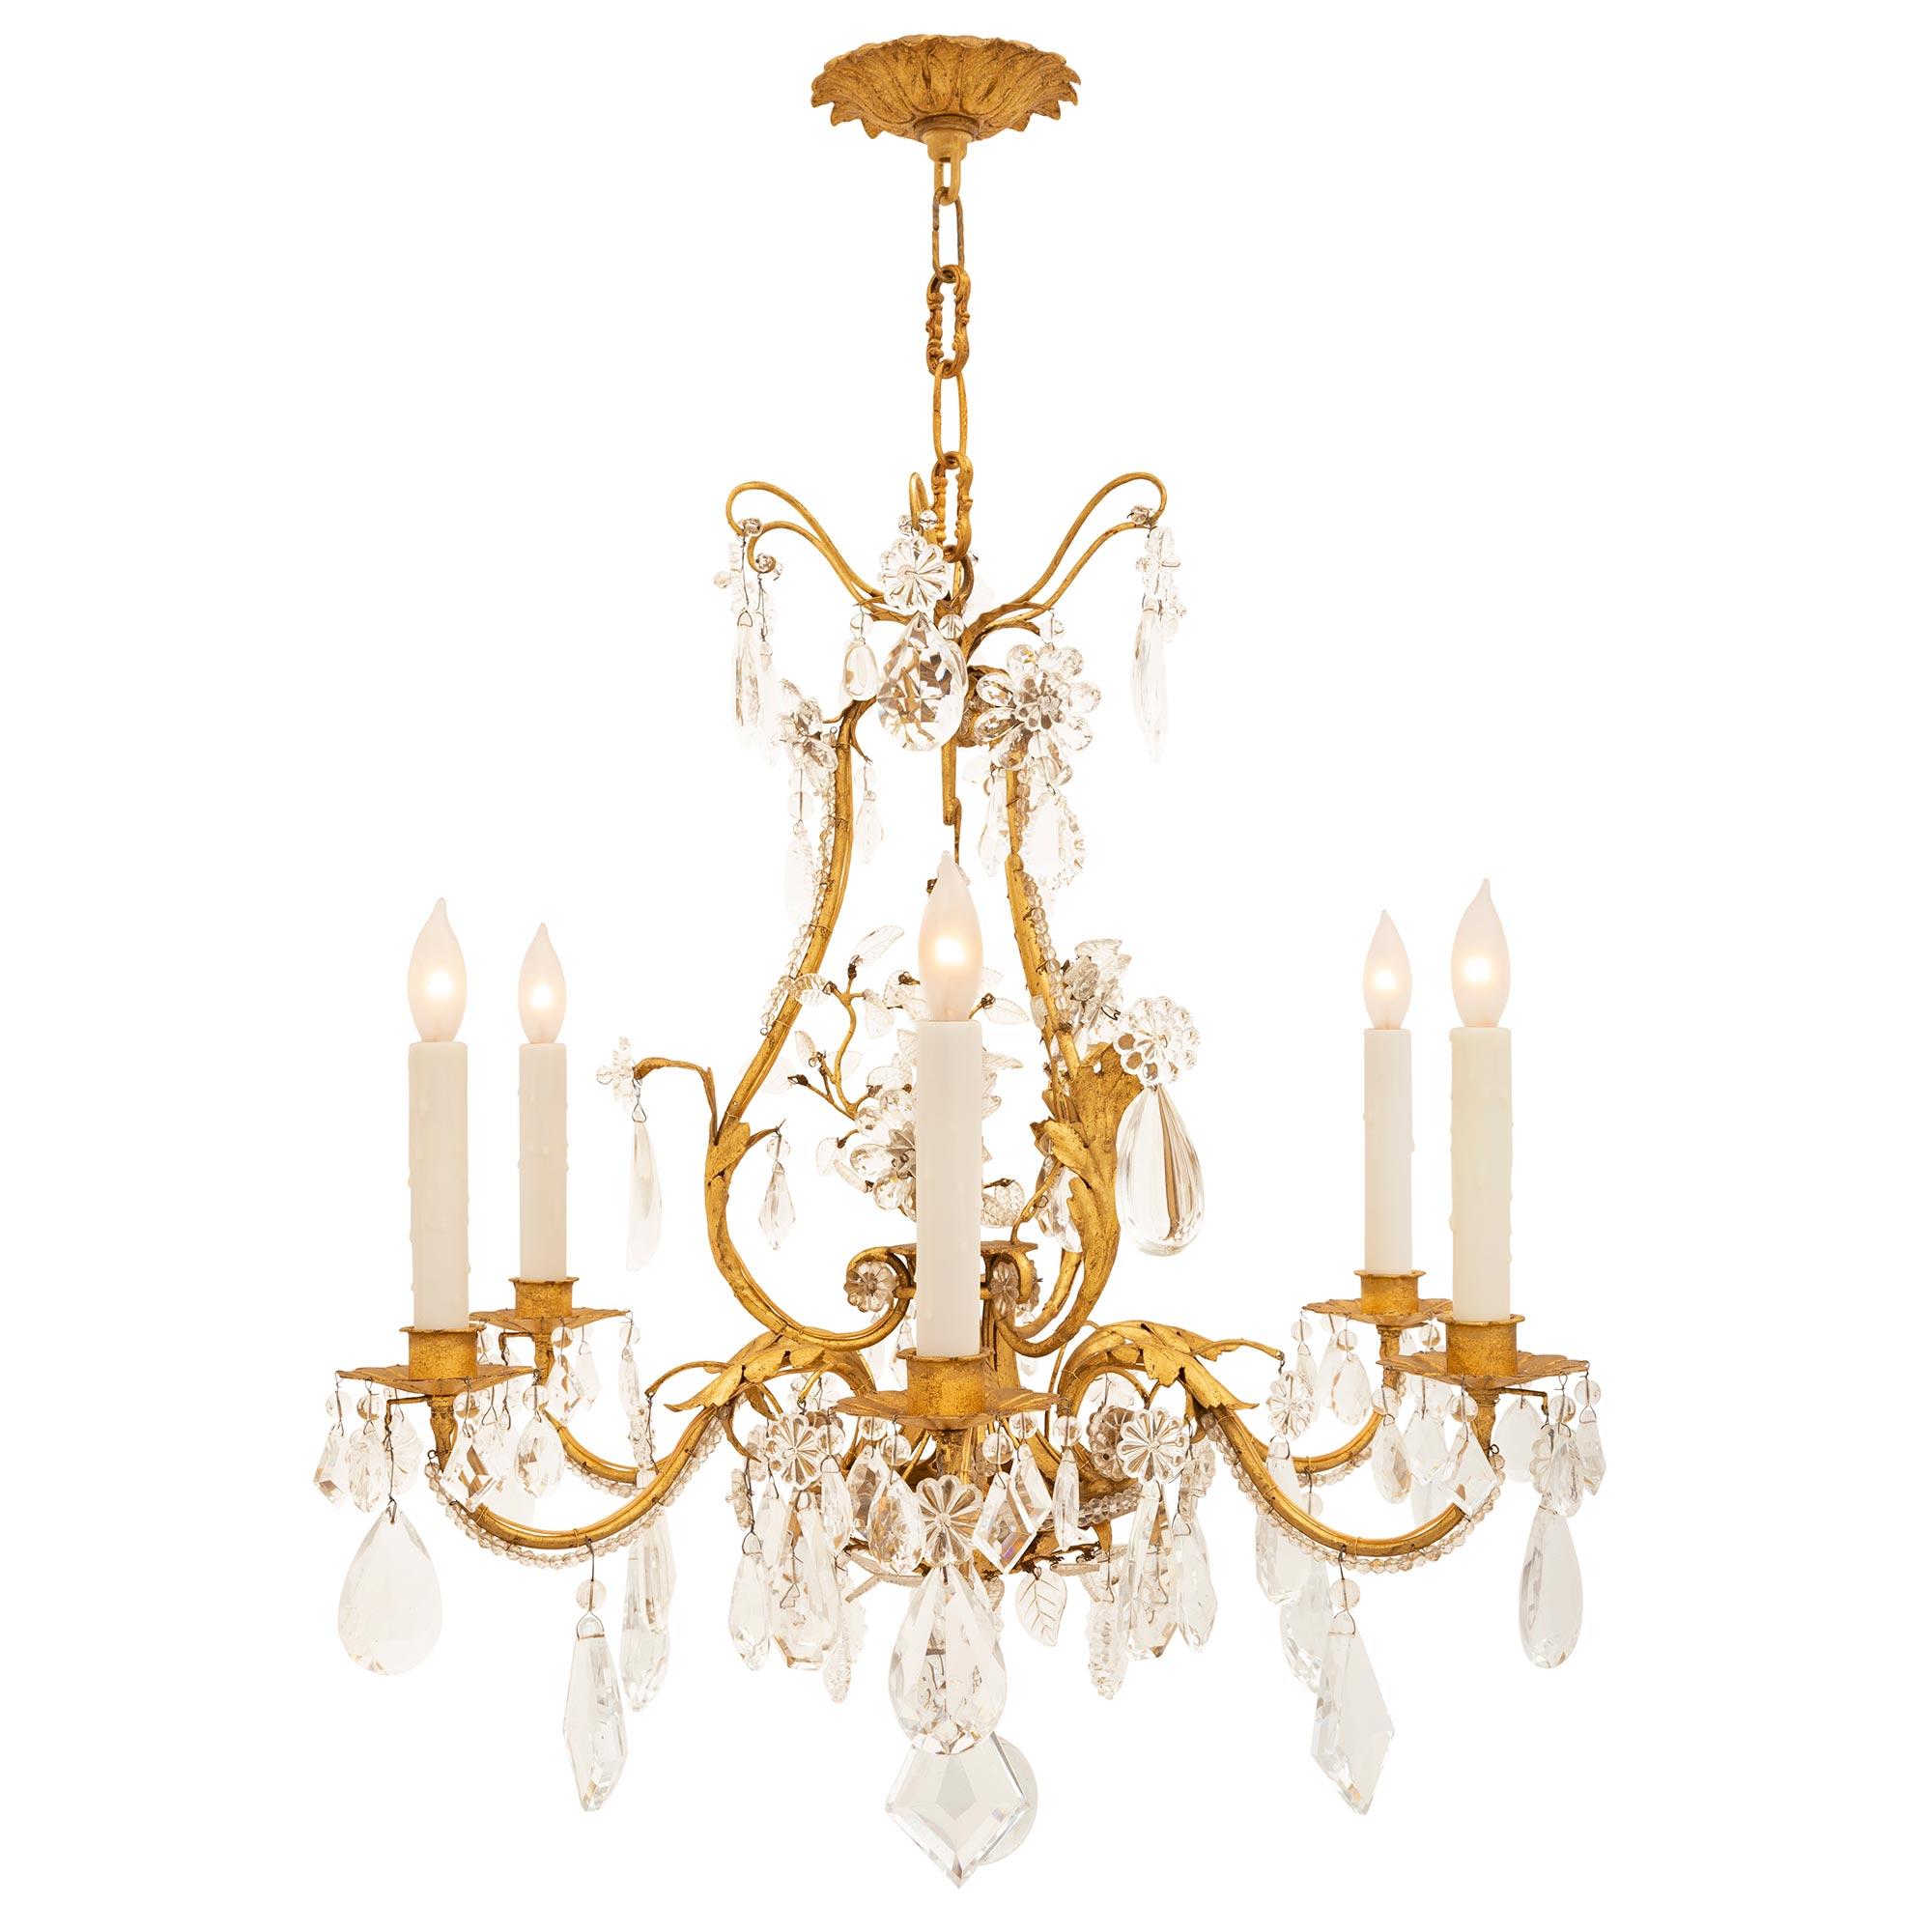 An outstanding French 19th century Louis XV st. gilt metal and crystal chandelier attributed to Maison Bagues. The six arm chandelier is centered by a beautiful solid crystal bottom ball below superb gilt metal acanthus leaves amidst a stunning